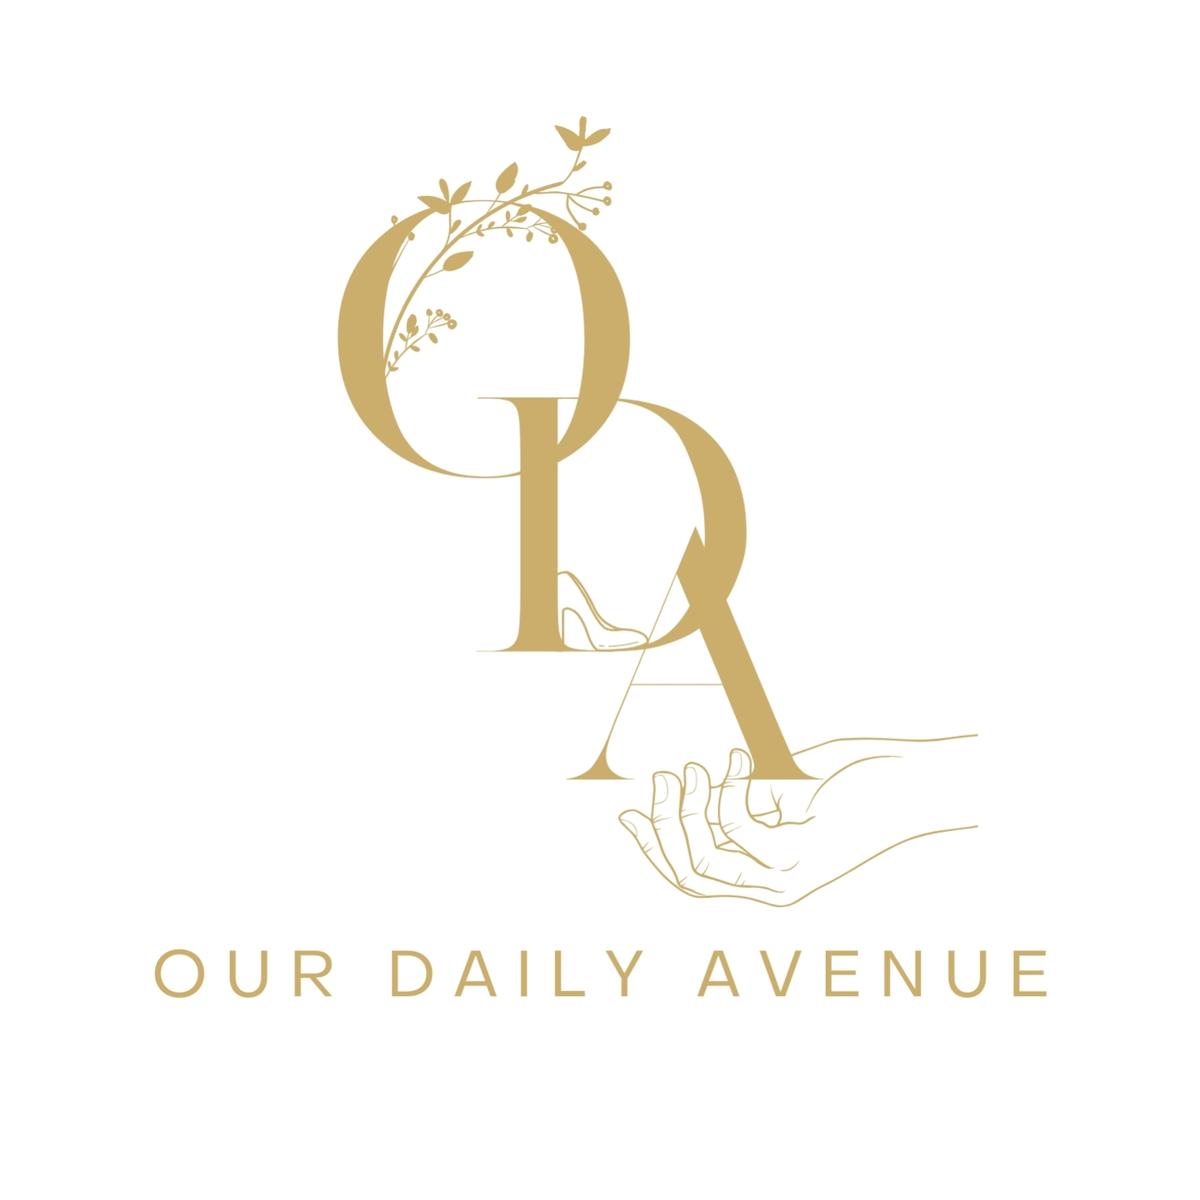 OurDailyAvenue's images